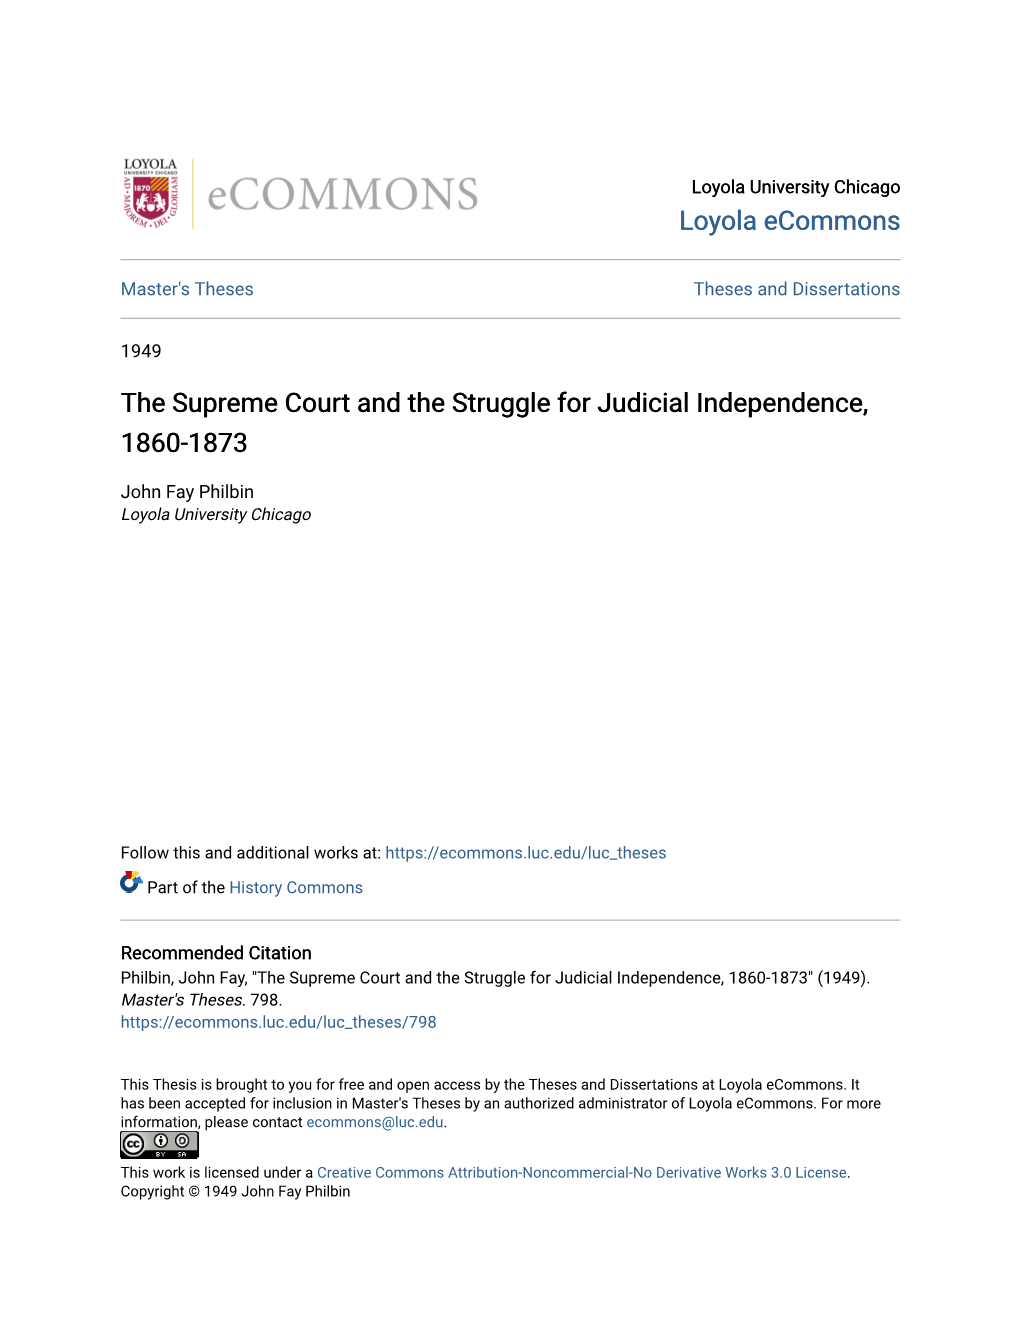 The Supreme Court and the Struggle for Judicial Independence, 1860-1873